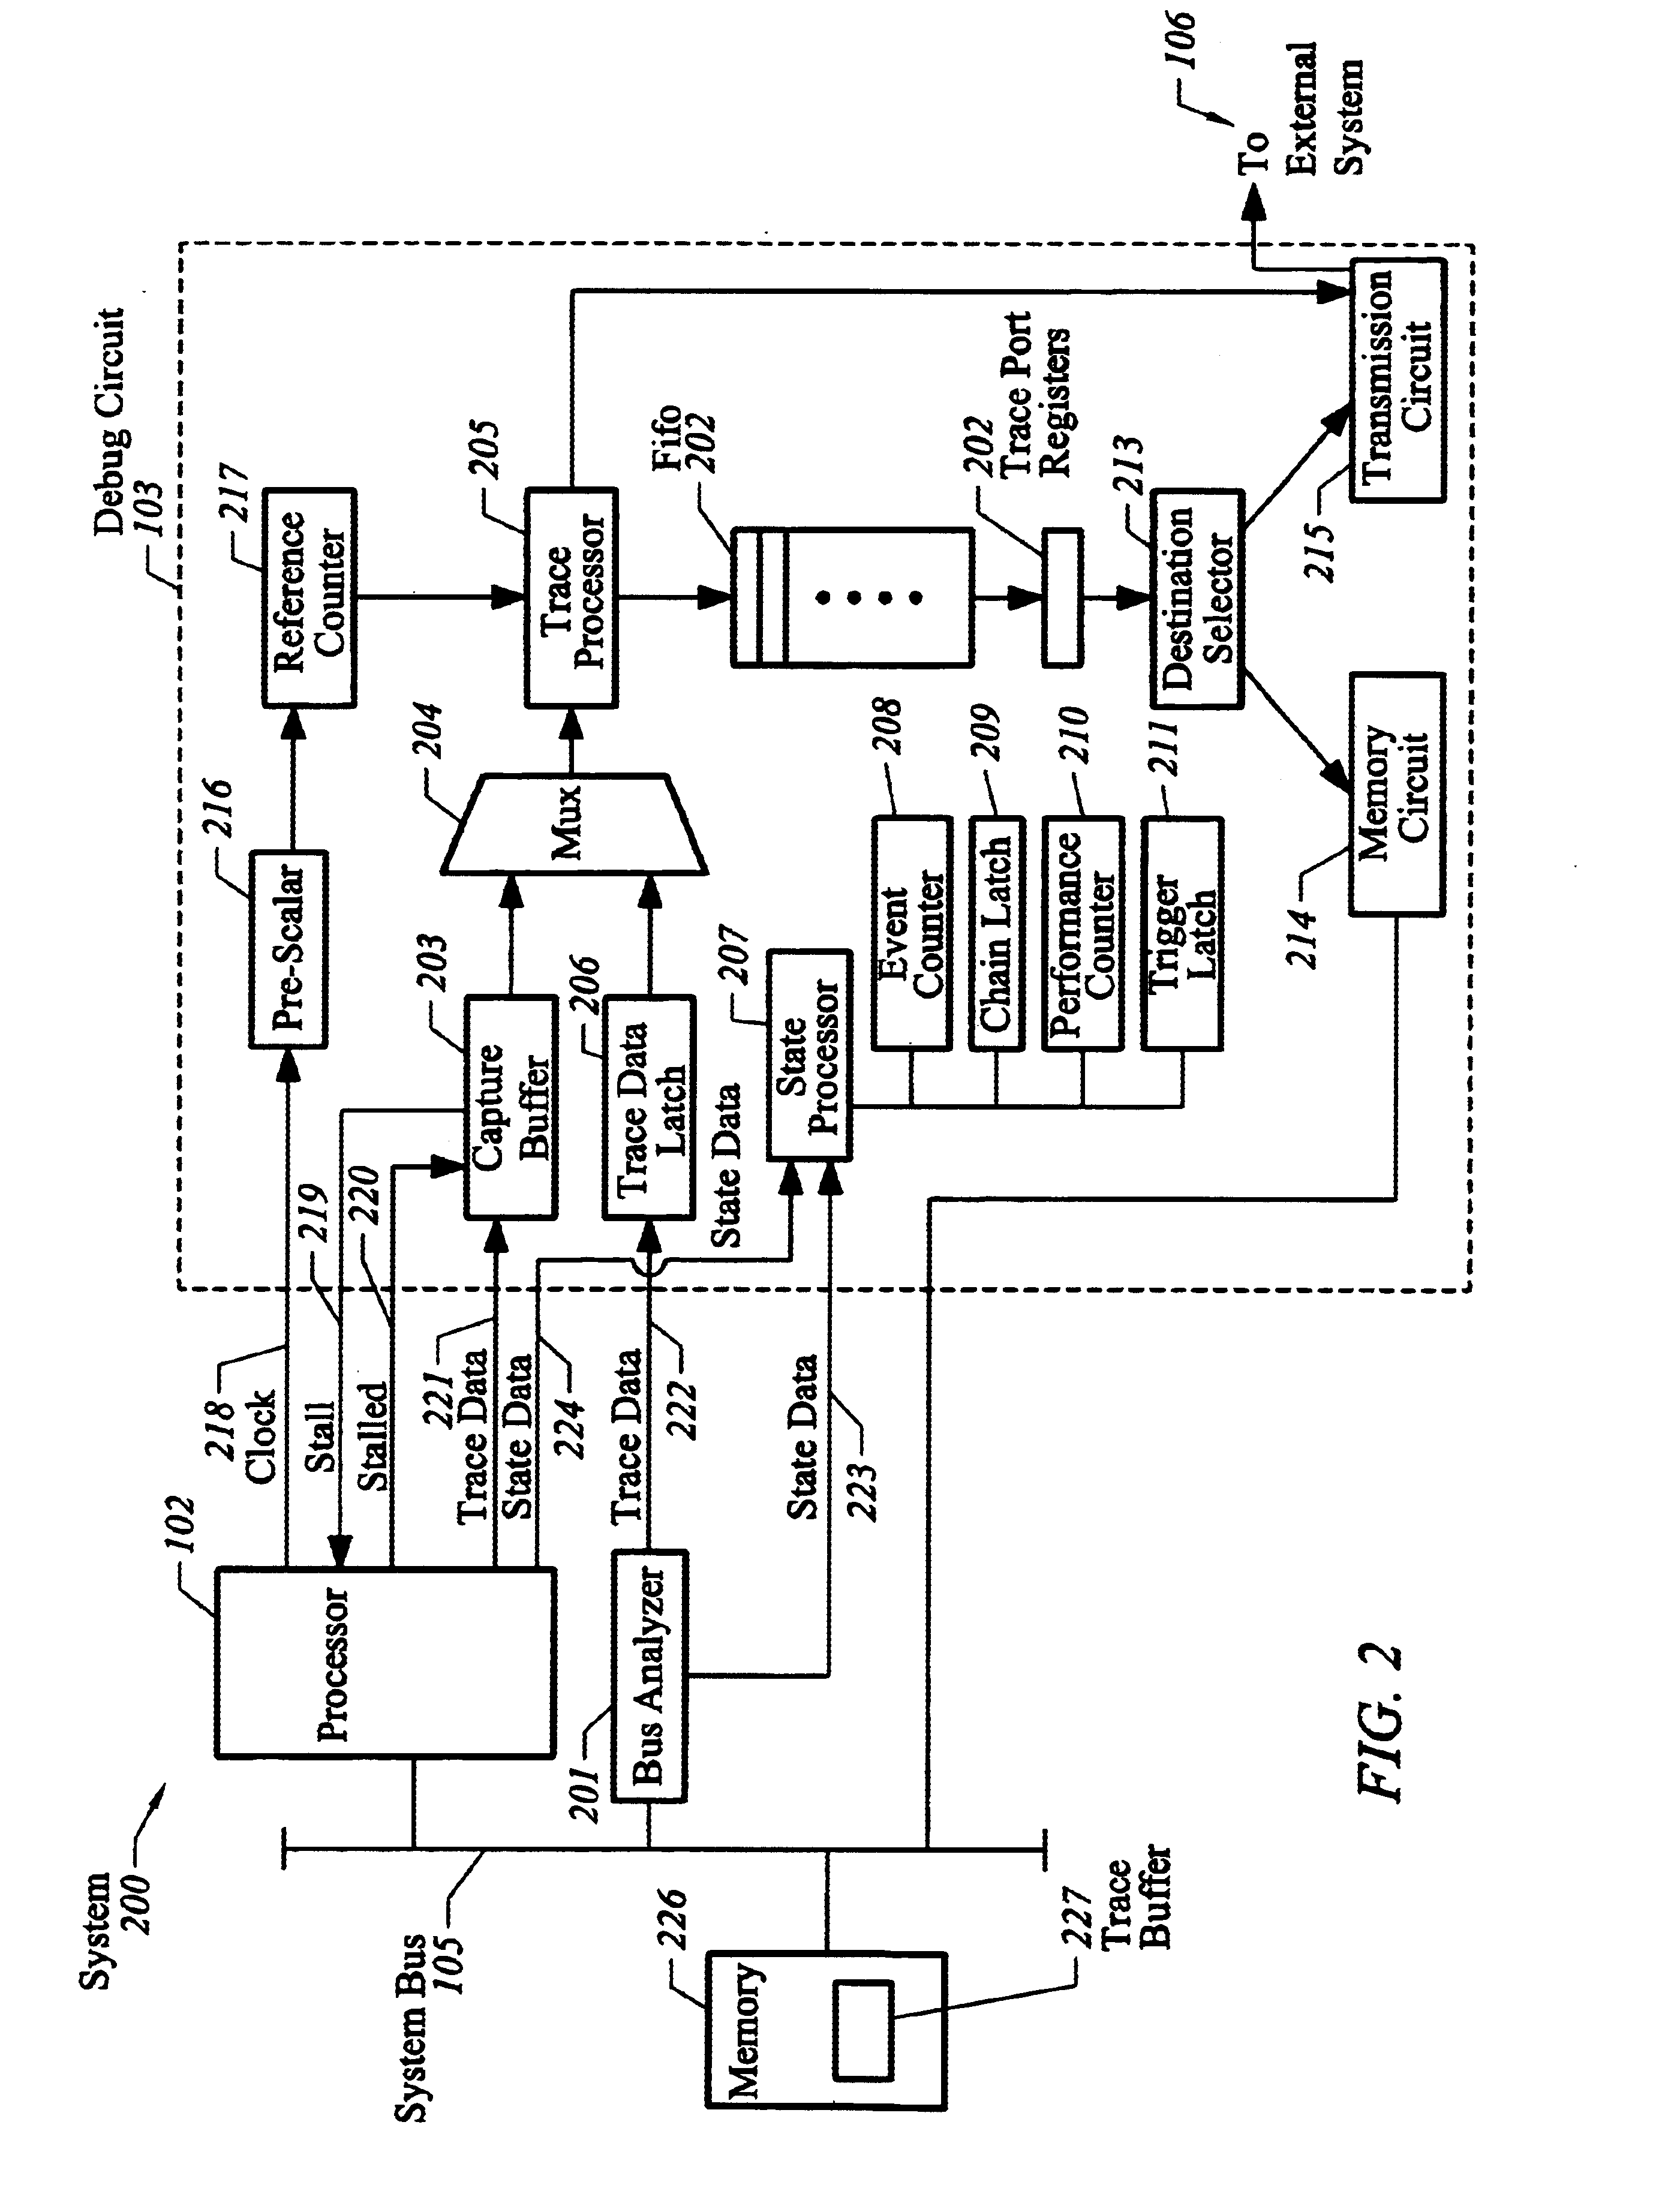 Method for compressing and decompressing trace information